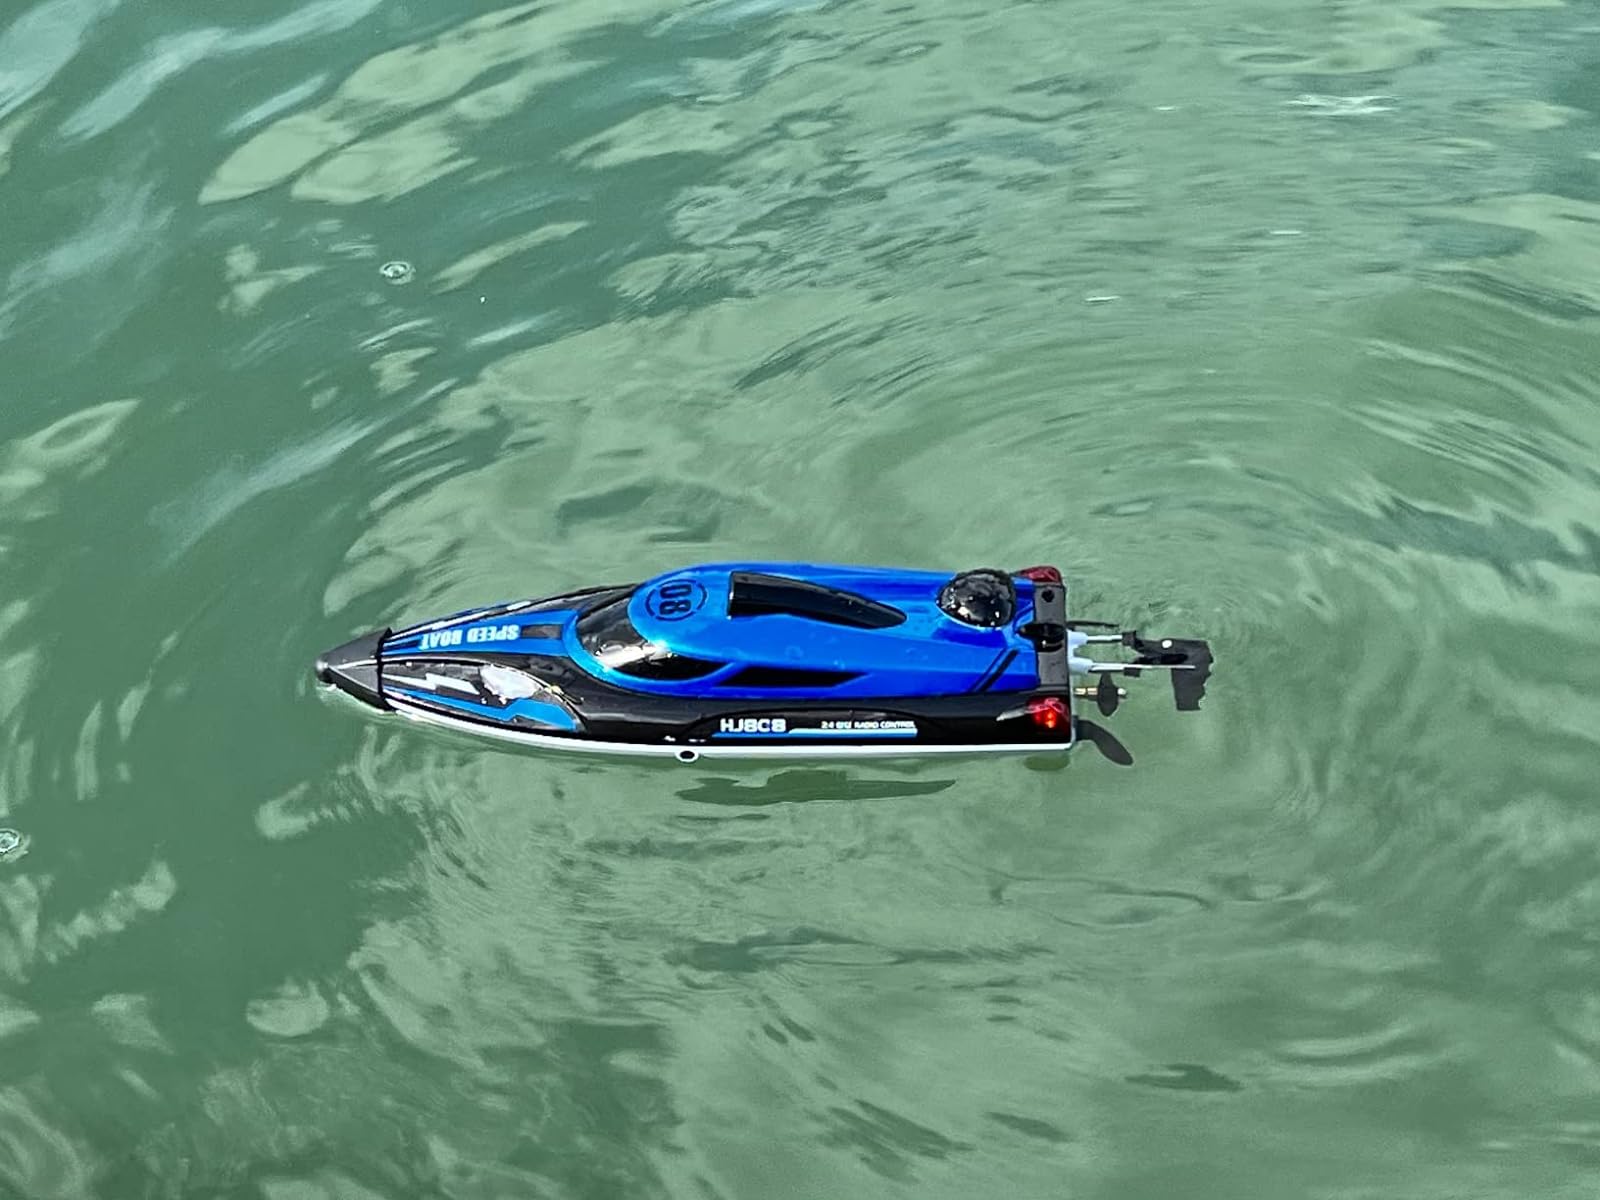 High Speed Remote Control Racing Boat For Kids photo review